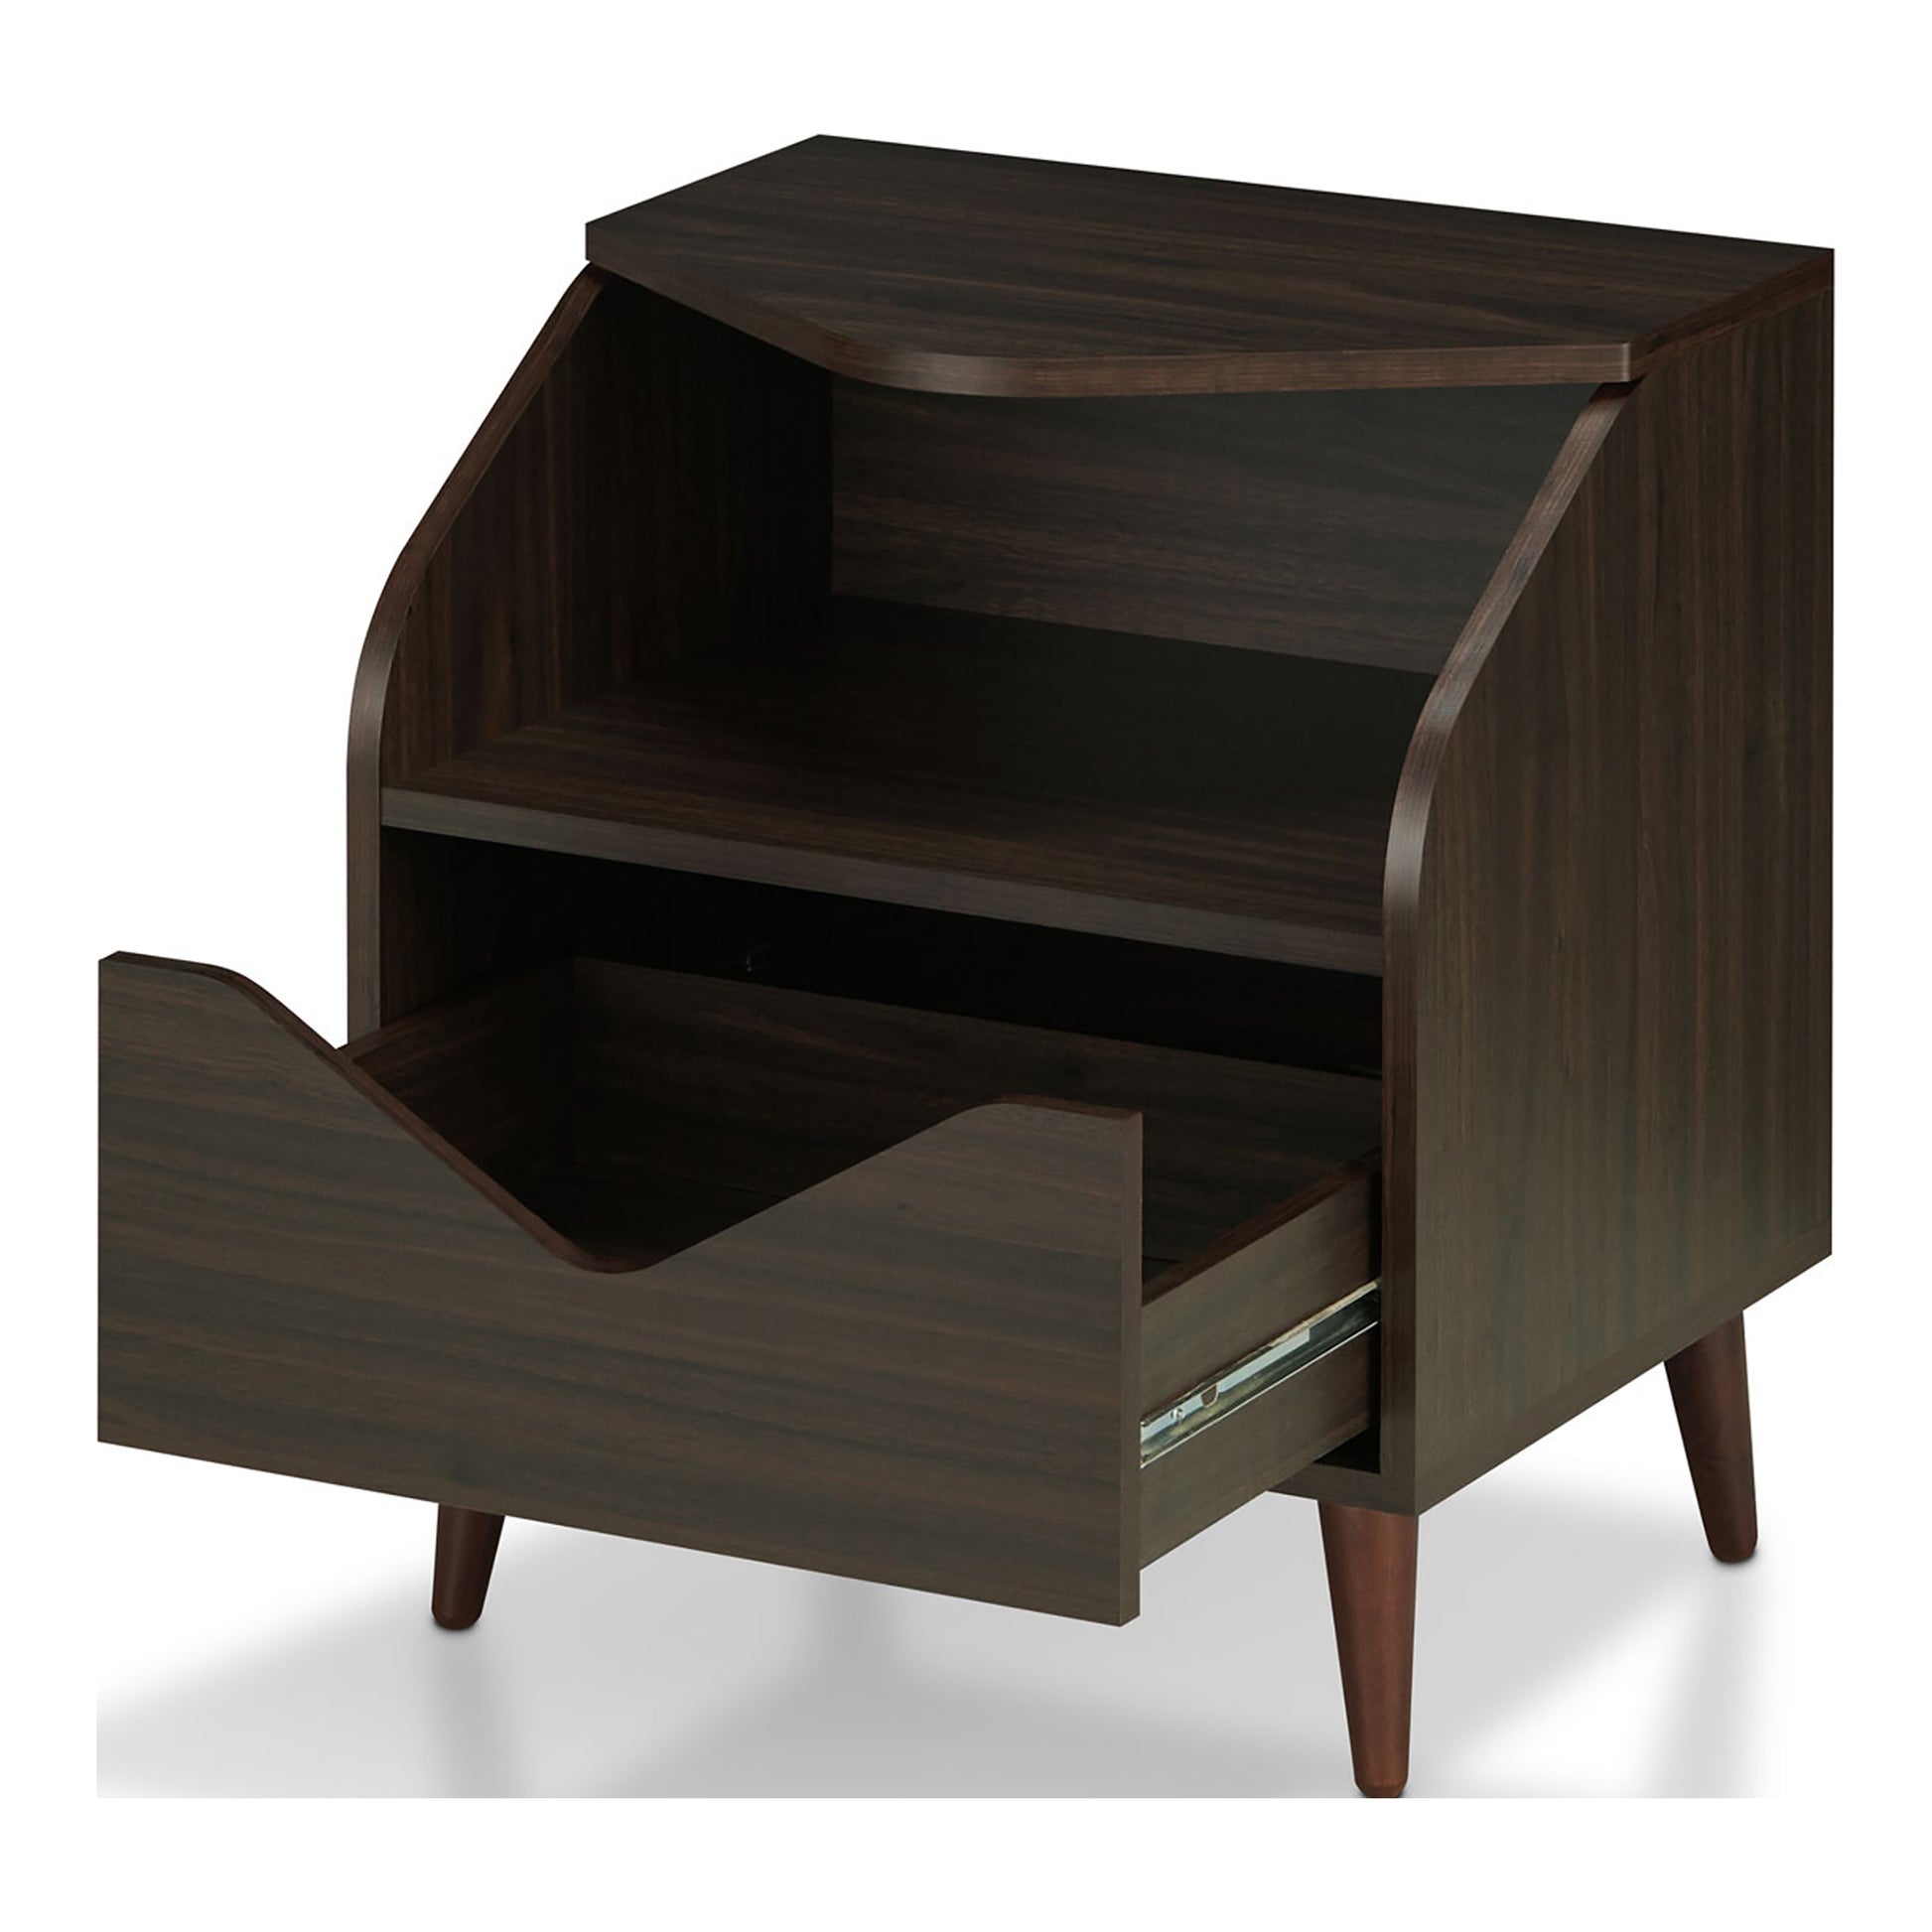 Left angled mid-century modern wenge one-drawer end table with drawer open on a white background